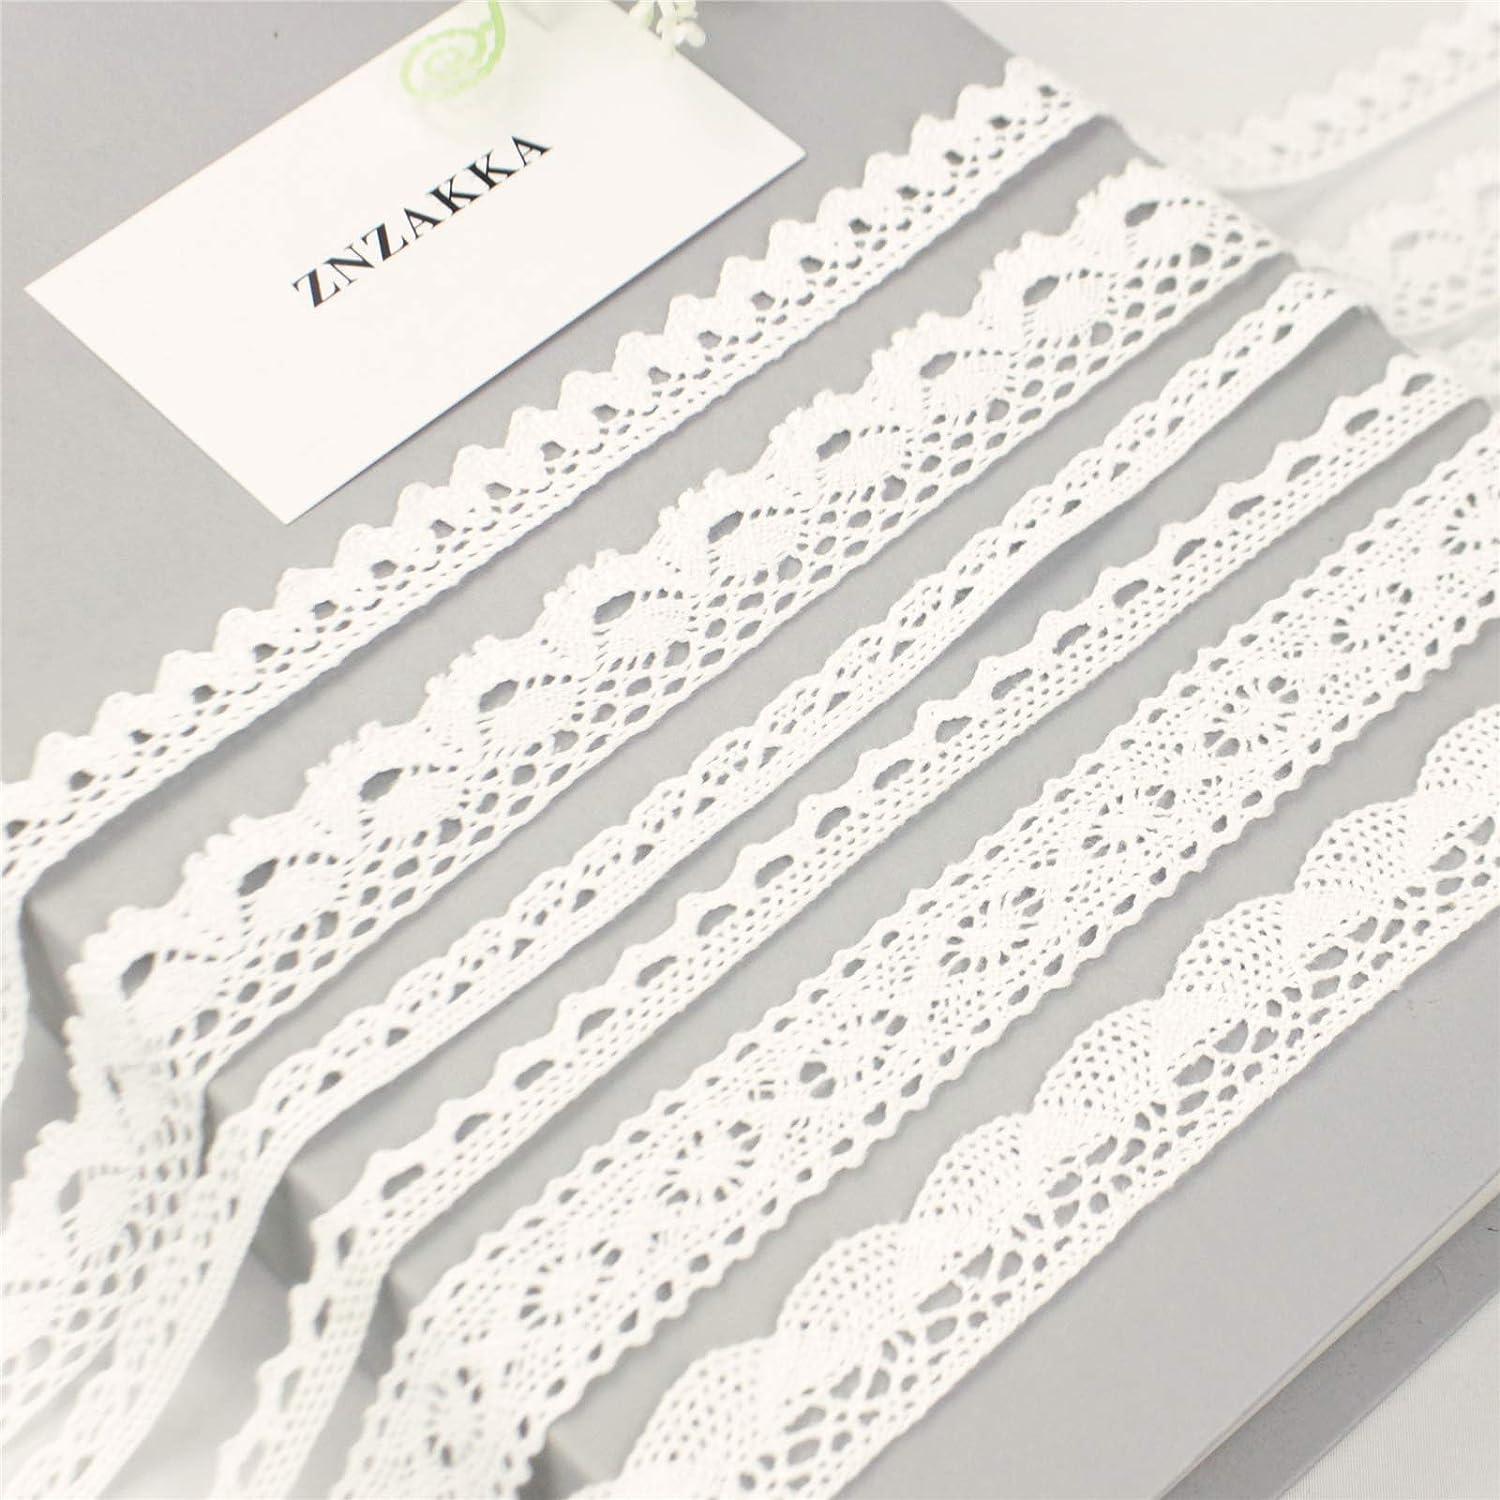 10 Yards of White Lace Trim/ 10 Yards of White Lace Ribbon Approx